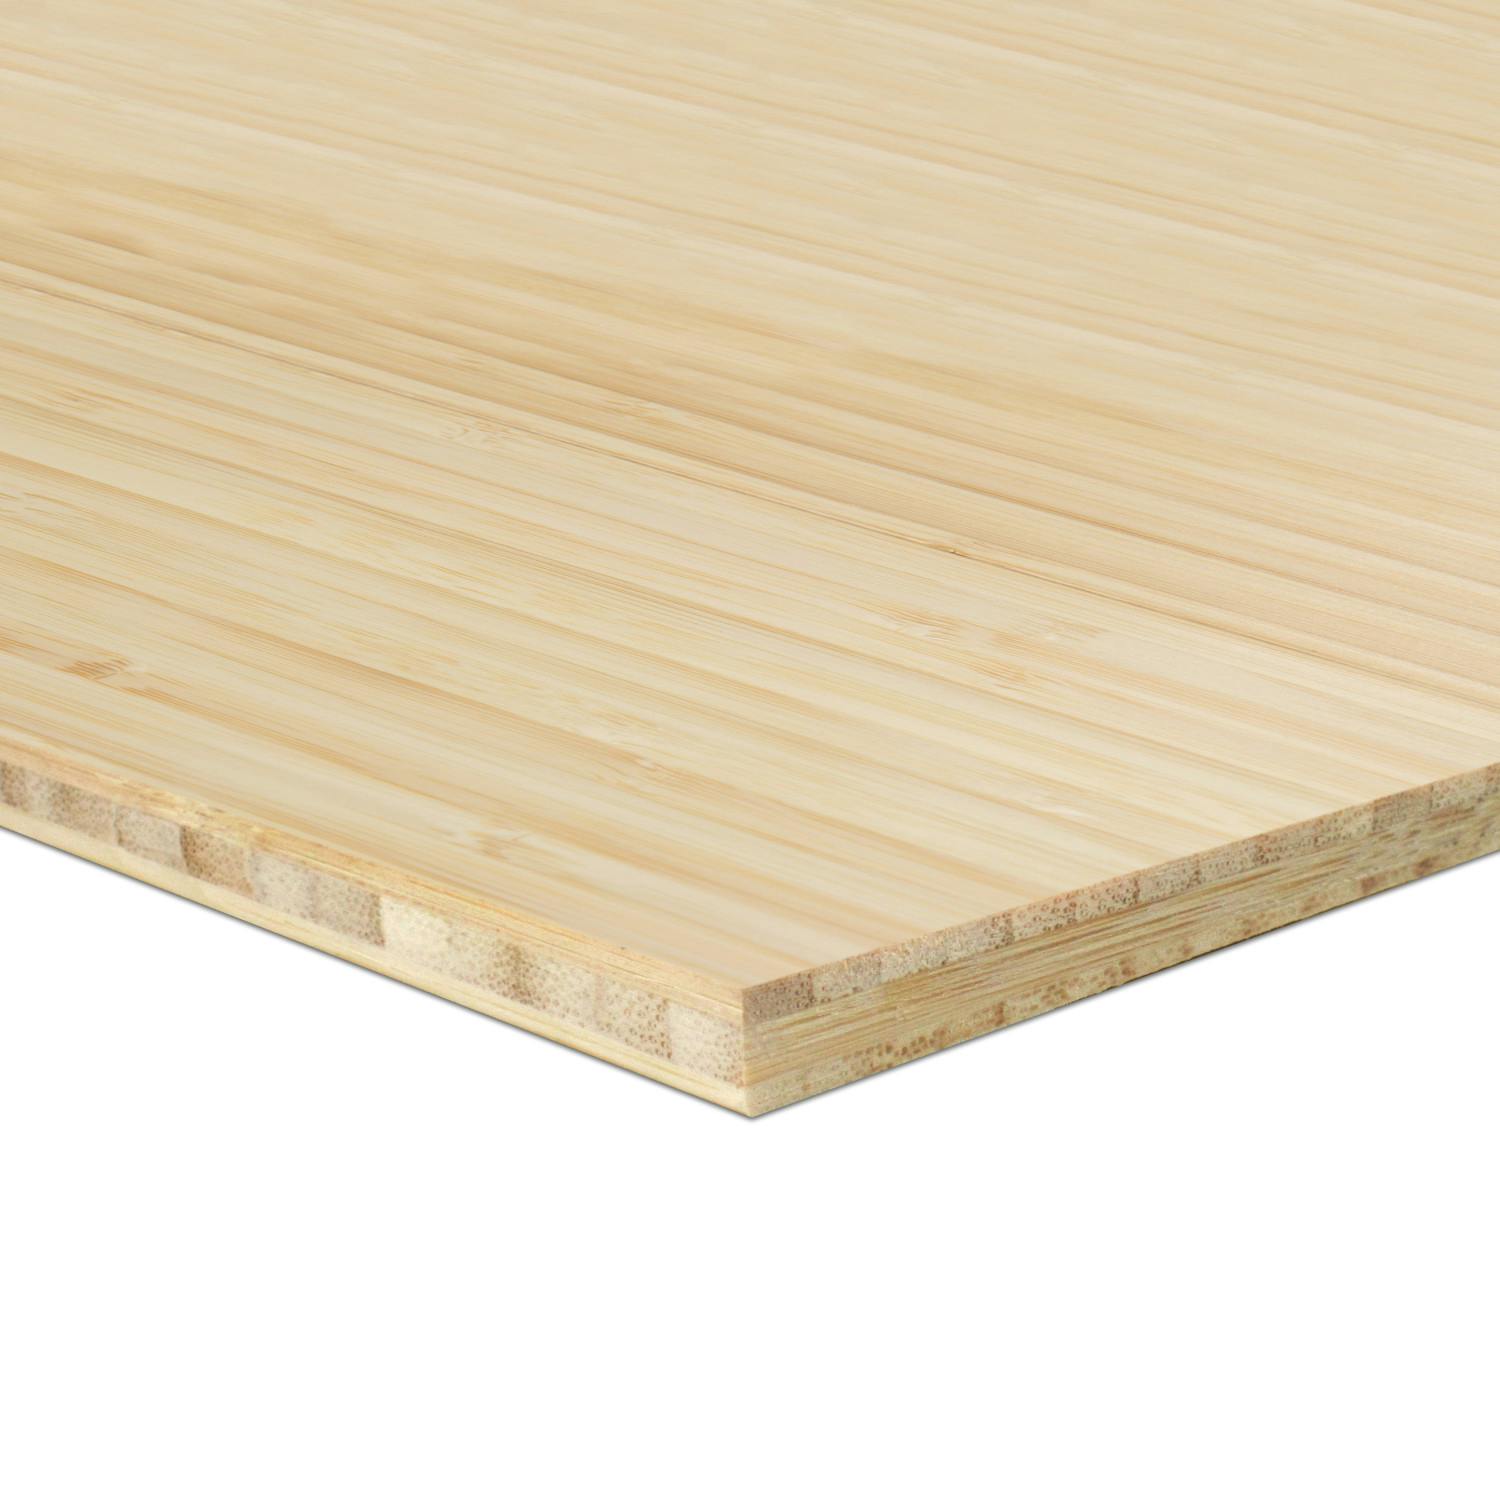 Bamboo Plywood - 3ply 1/4 in. Vertical Natural